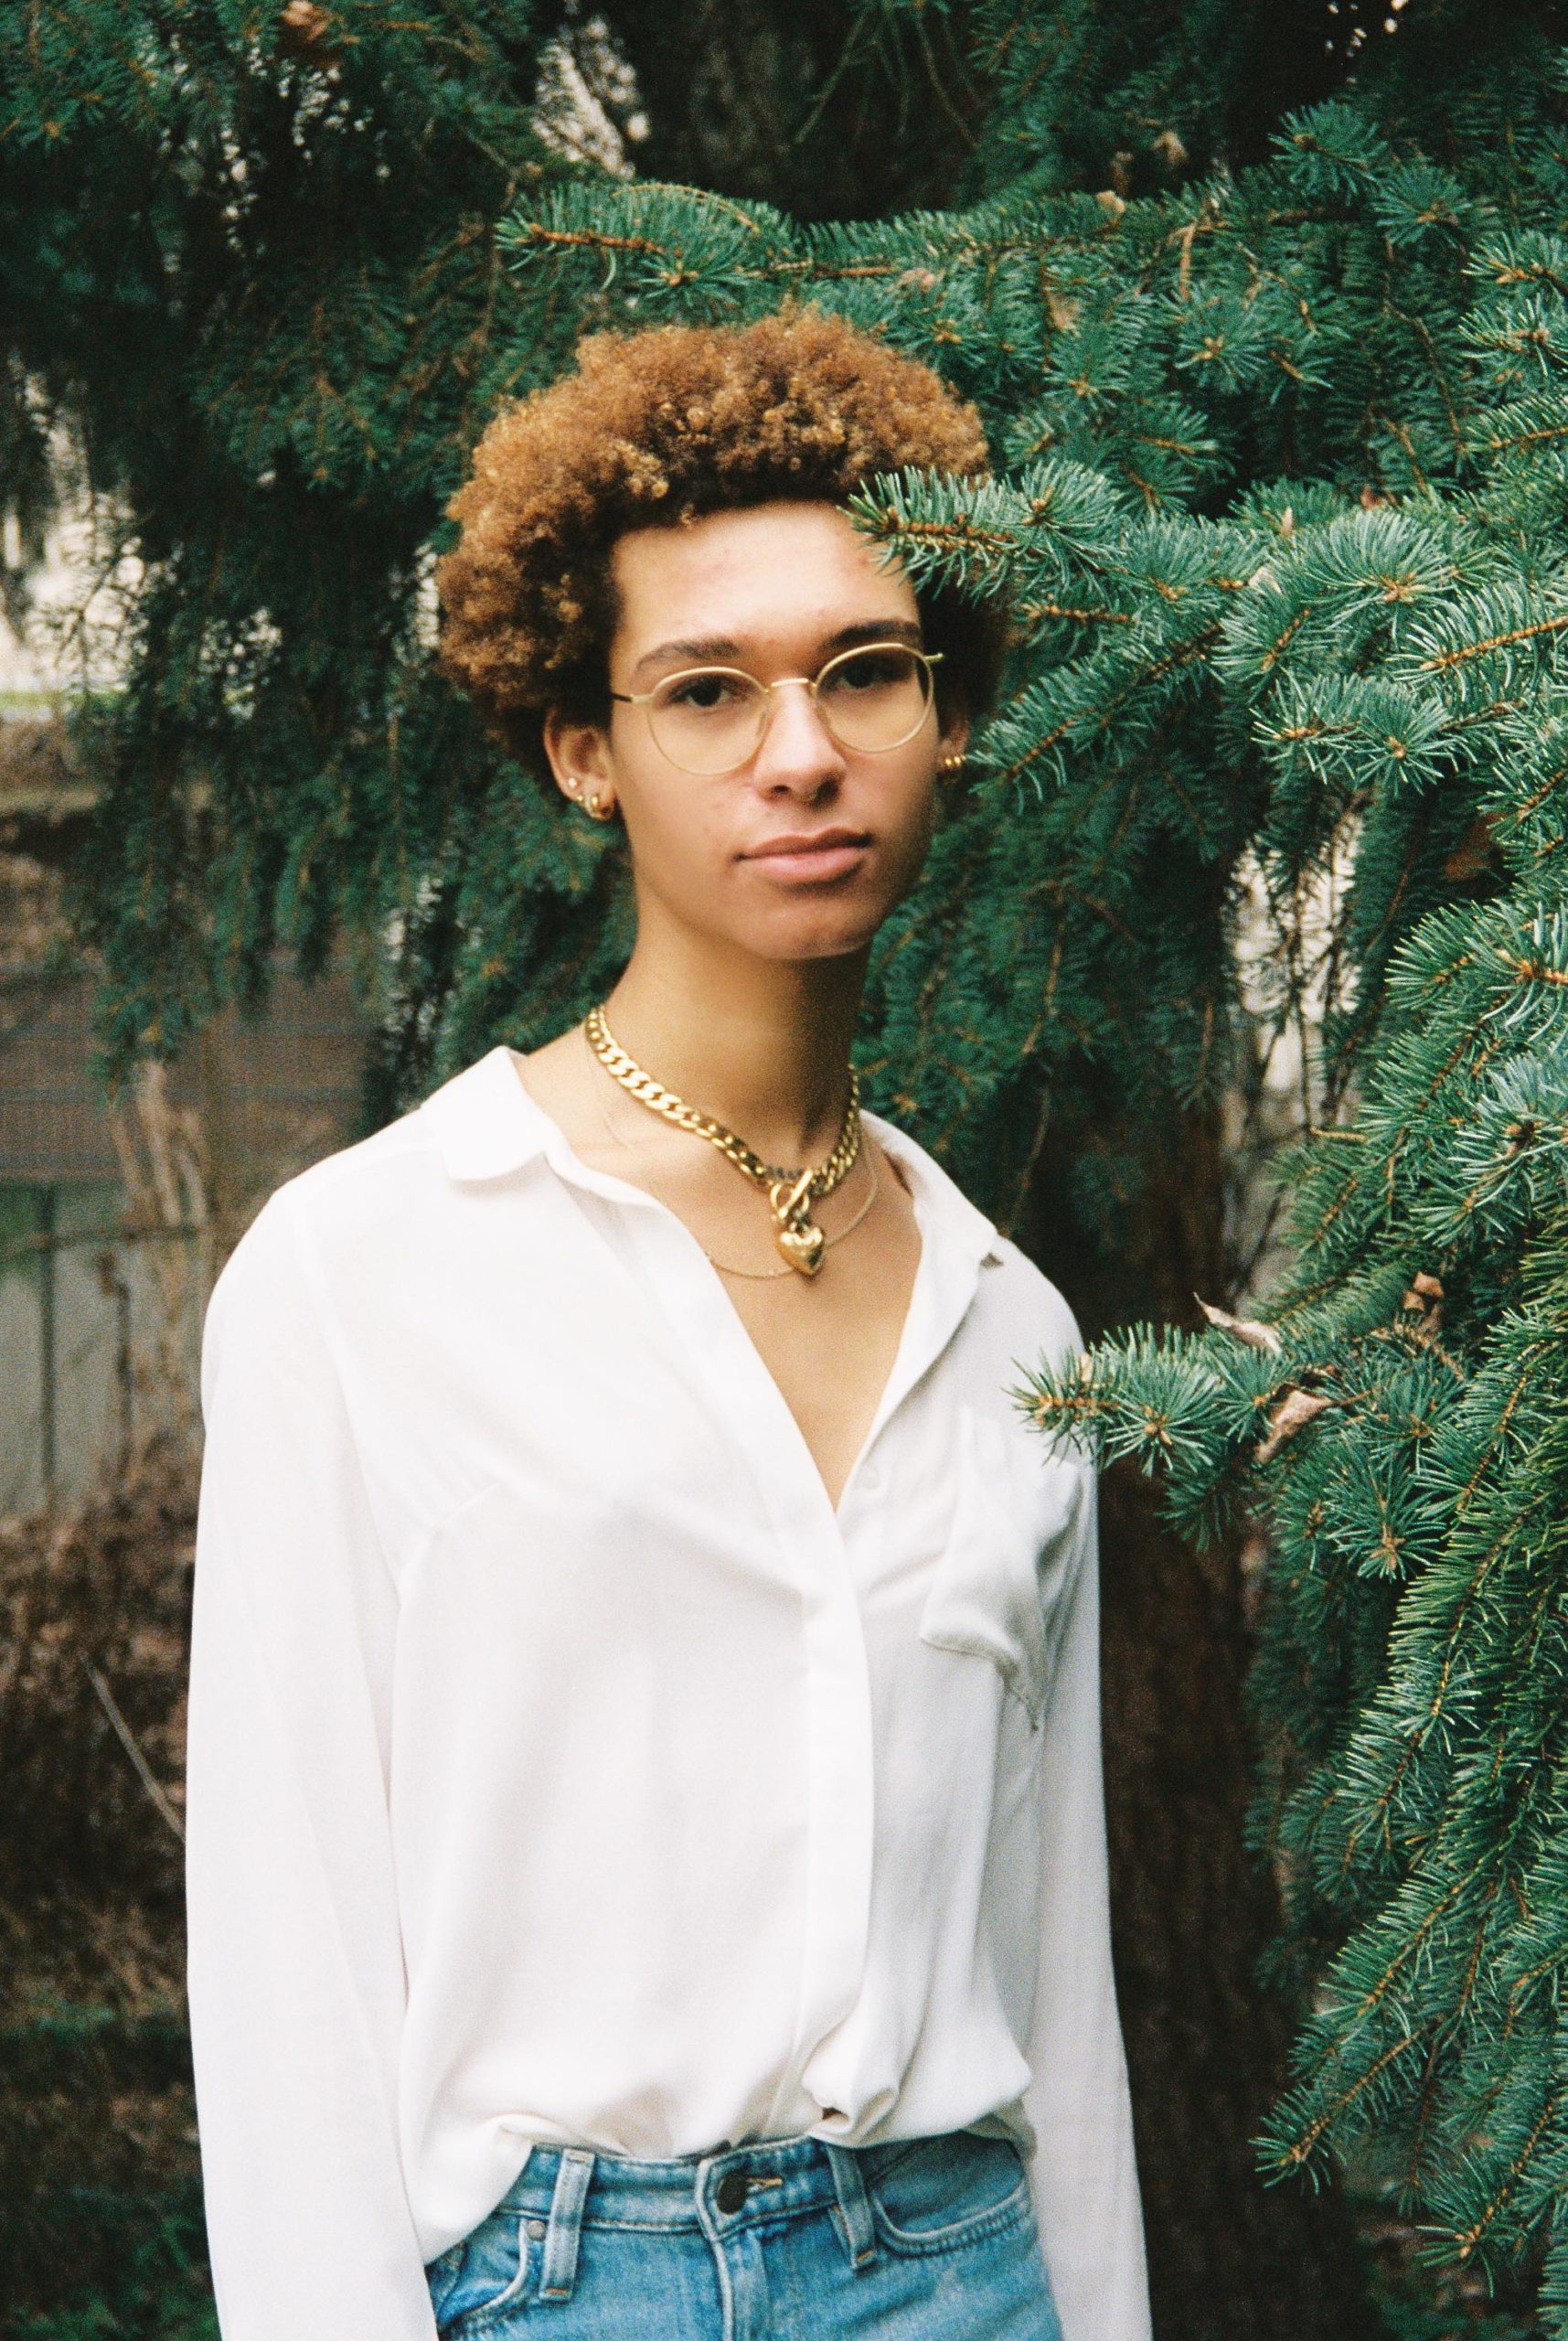 Glasgow music producer and DJ TAAHLIAH has organised a Black Lives Matter protest. <br><strong>Image credit:</strong> Cameron Bond<br>”/><span
class=